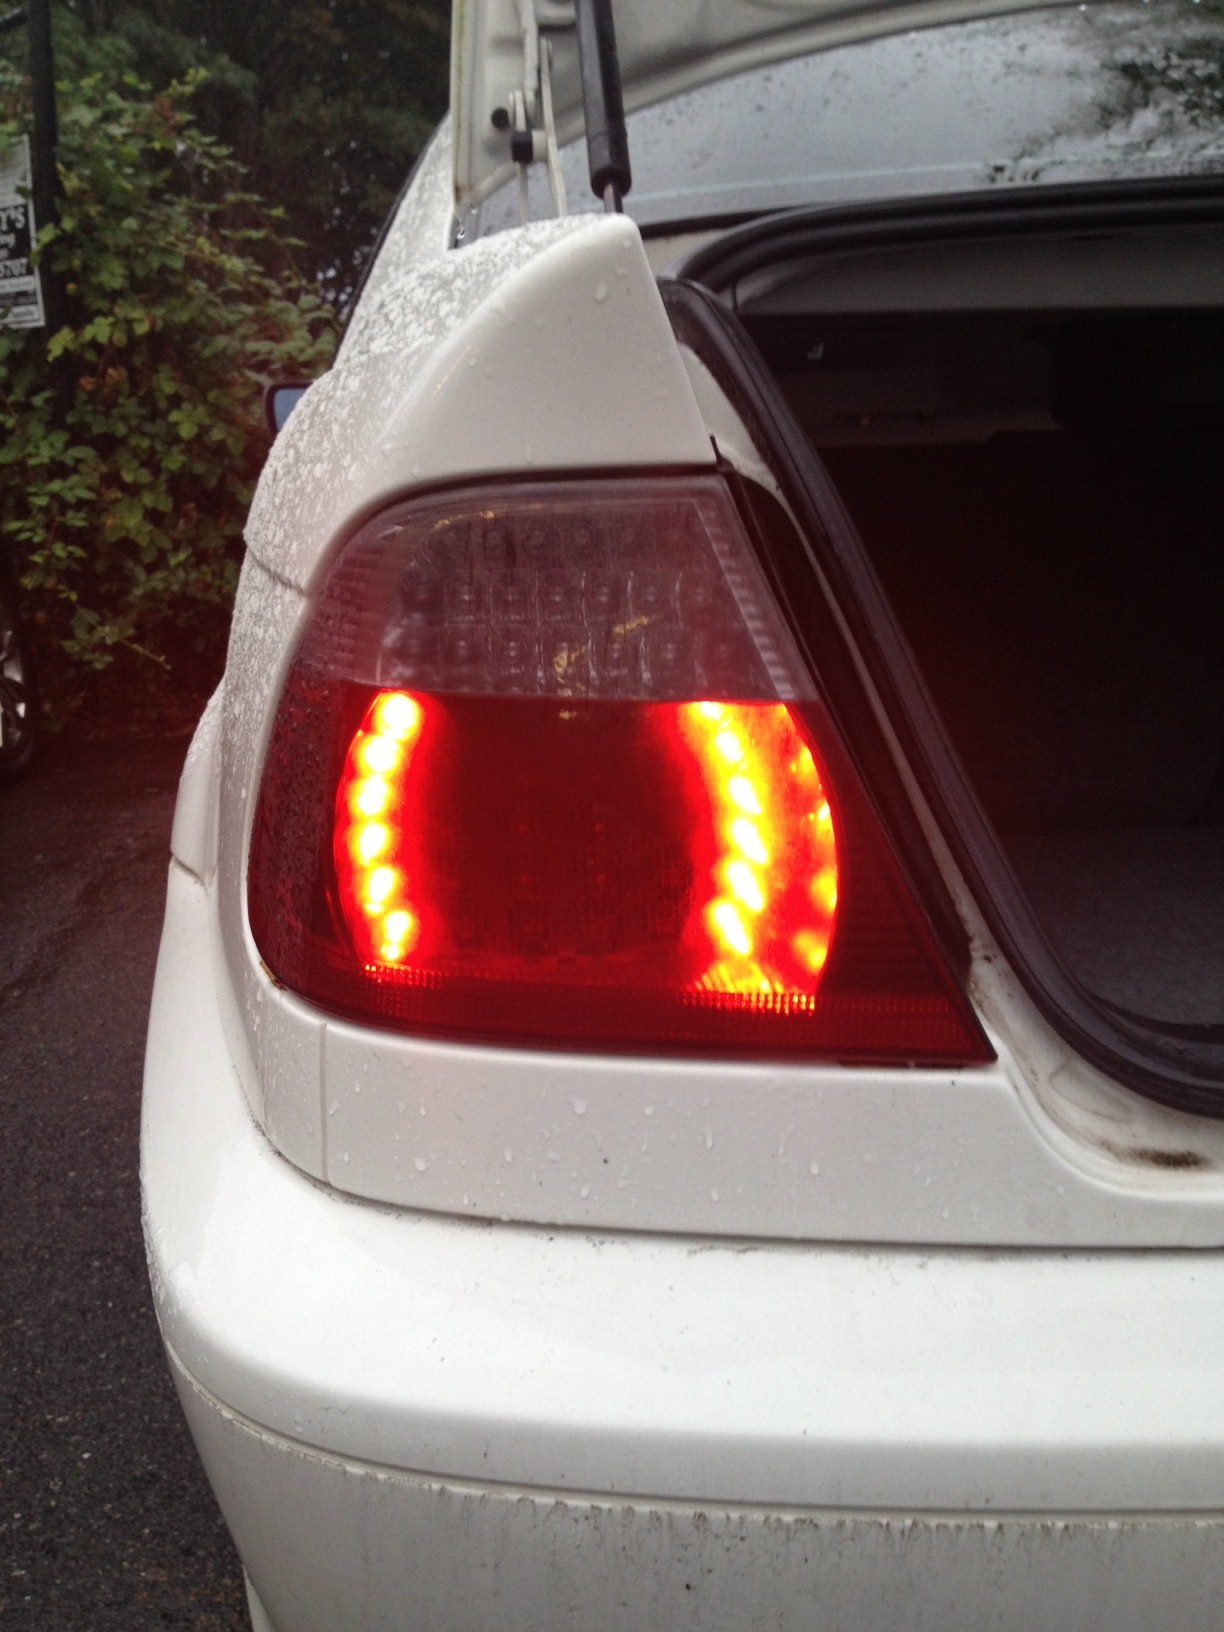 One tail light stays on even with key off